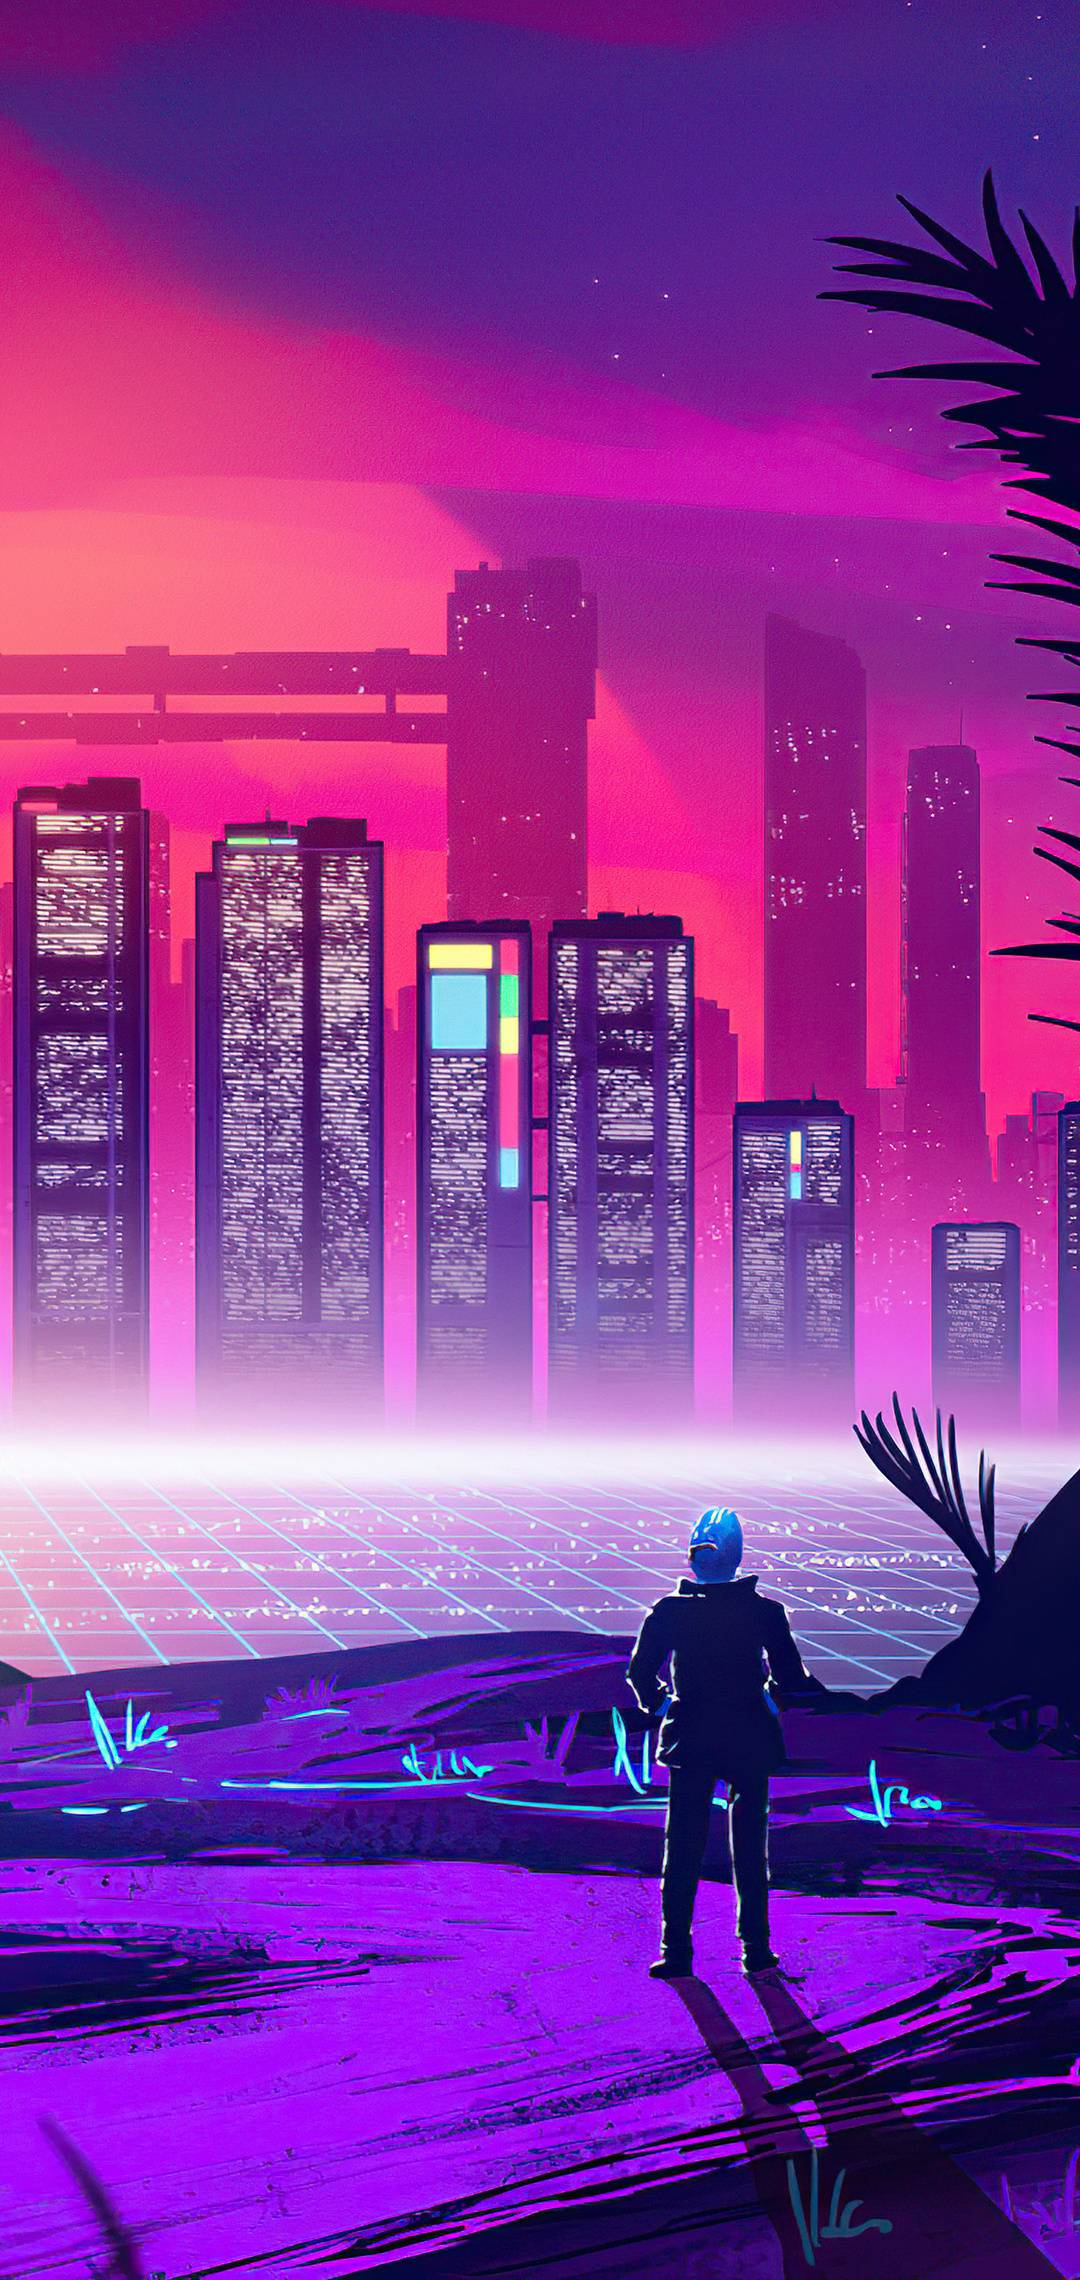 Aesthetic cyberpunk wallpaper for mobiles and tablets - Music